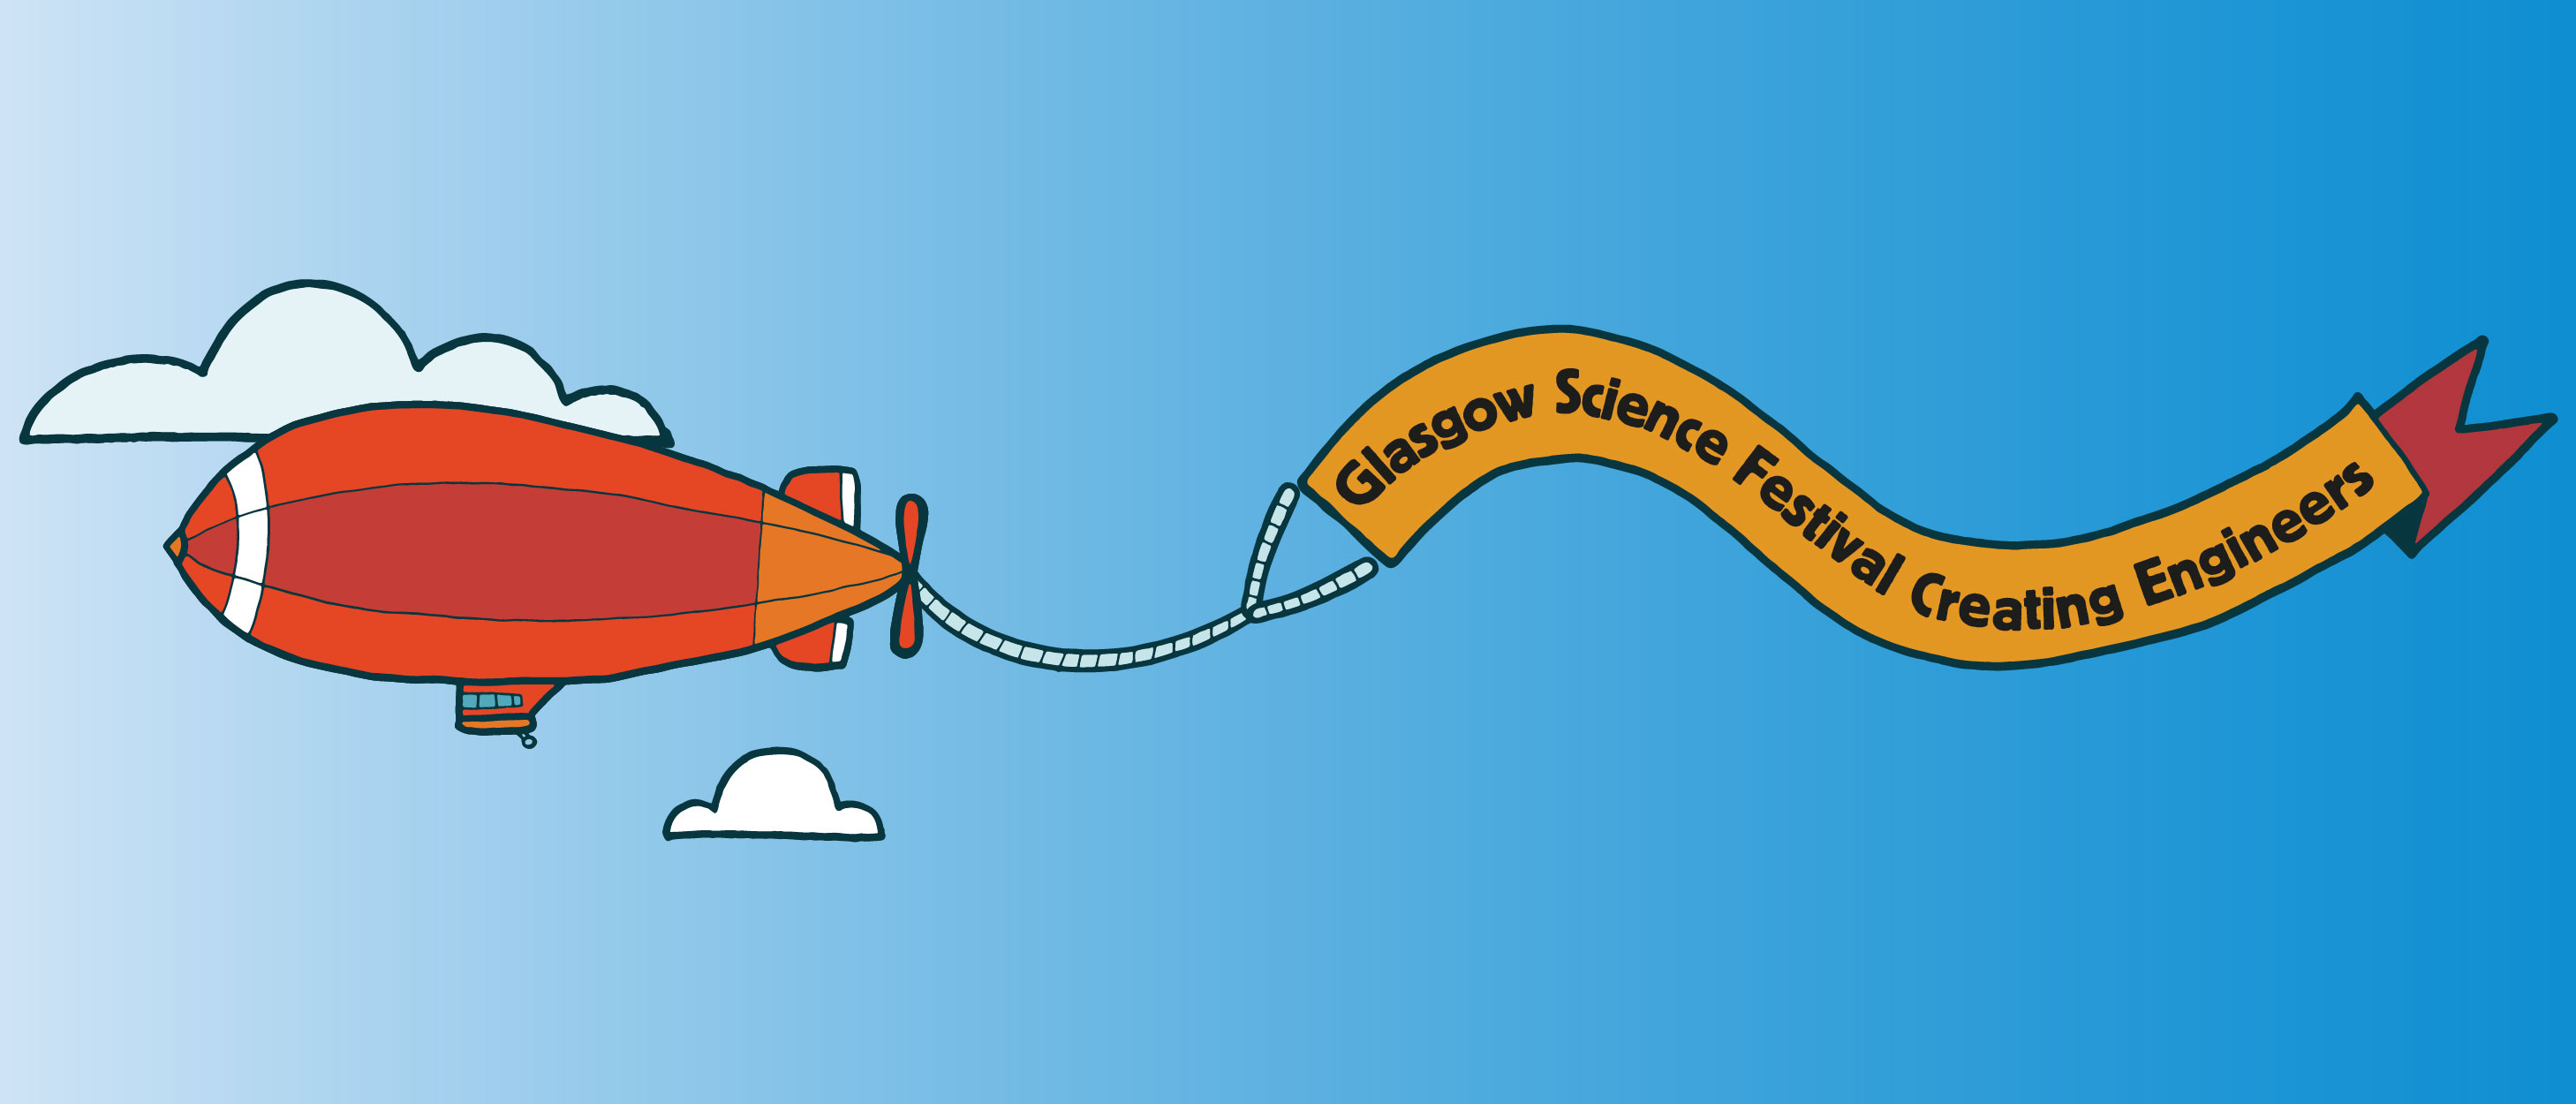 Cartoon image of an aeroplane in the clouds. Plane is attached to a banner that reads: Glasgow Science Festival Creating Engineers